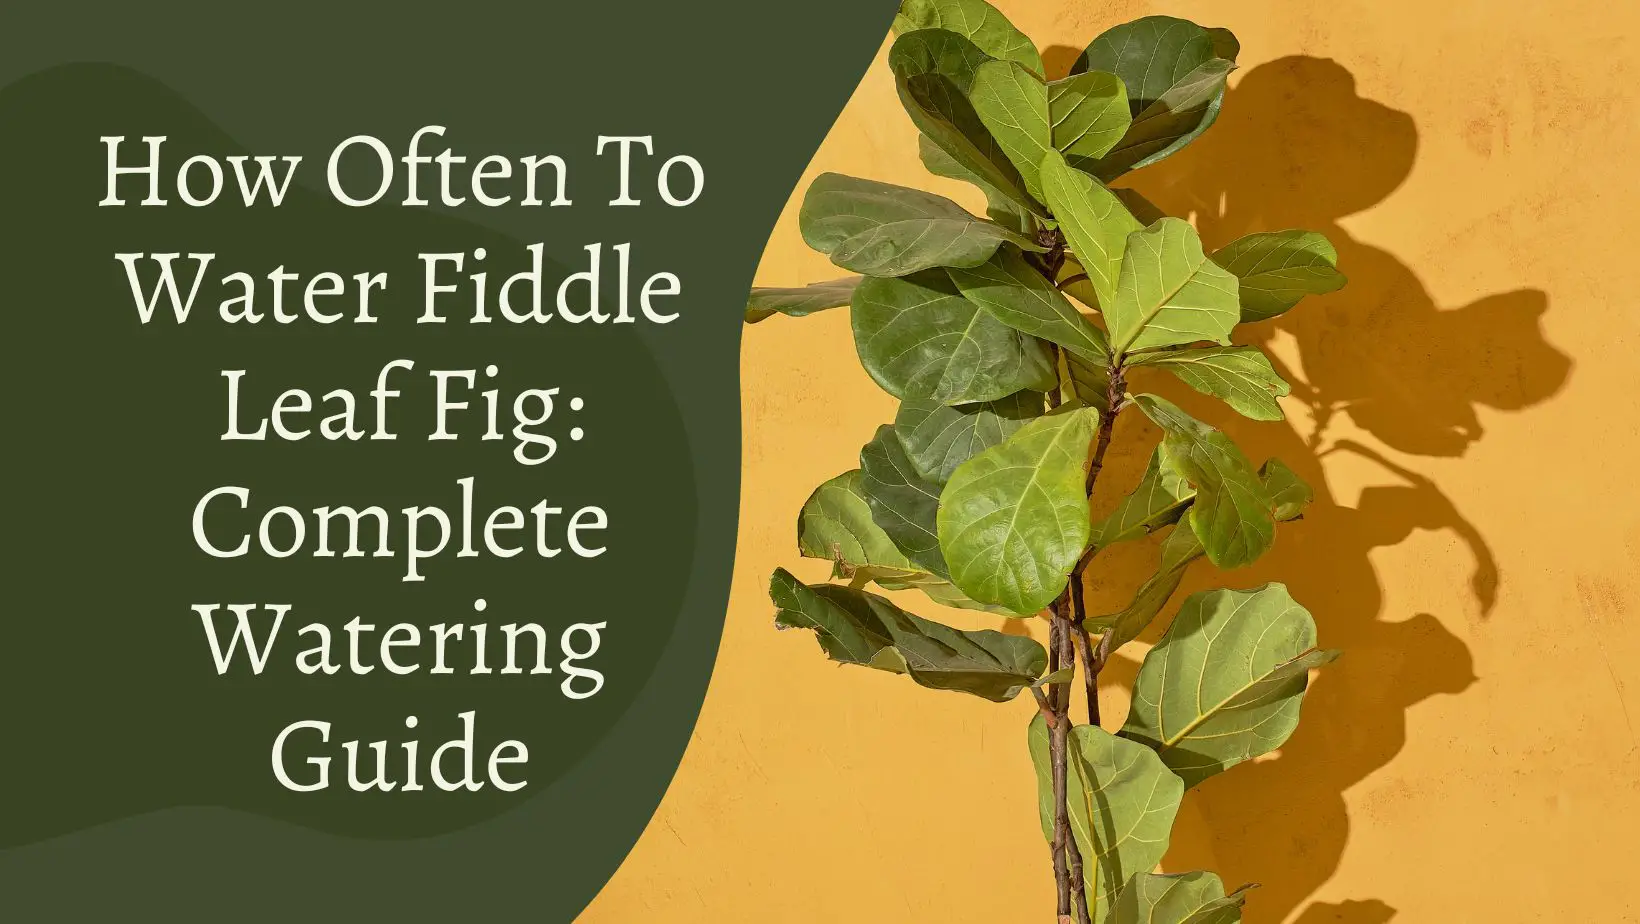 How Often To Water Fiddle Leaf Fig